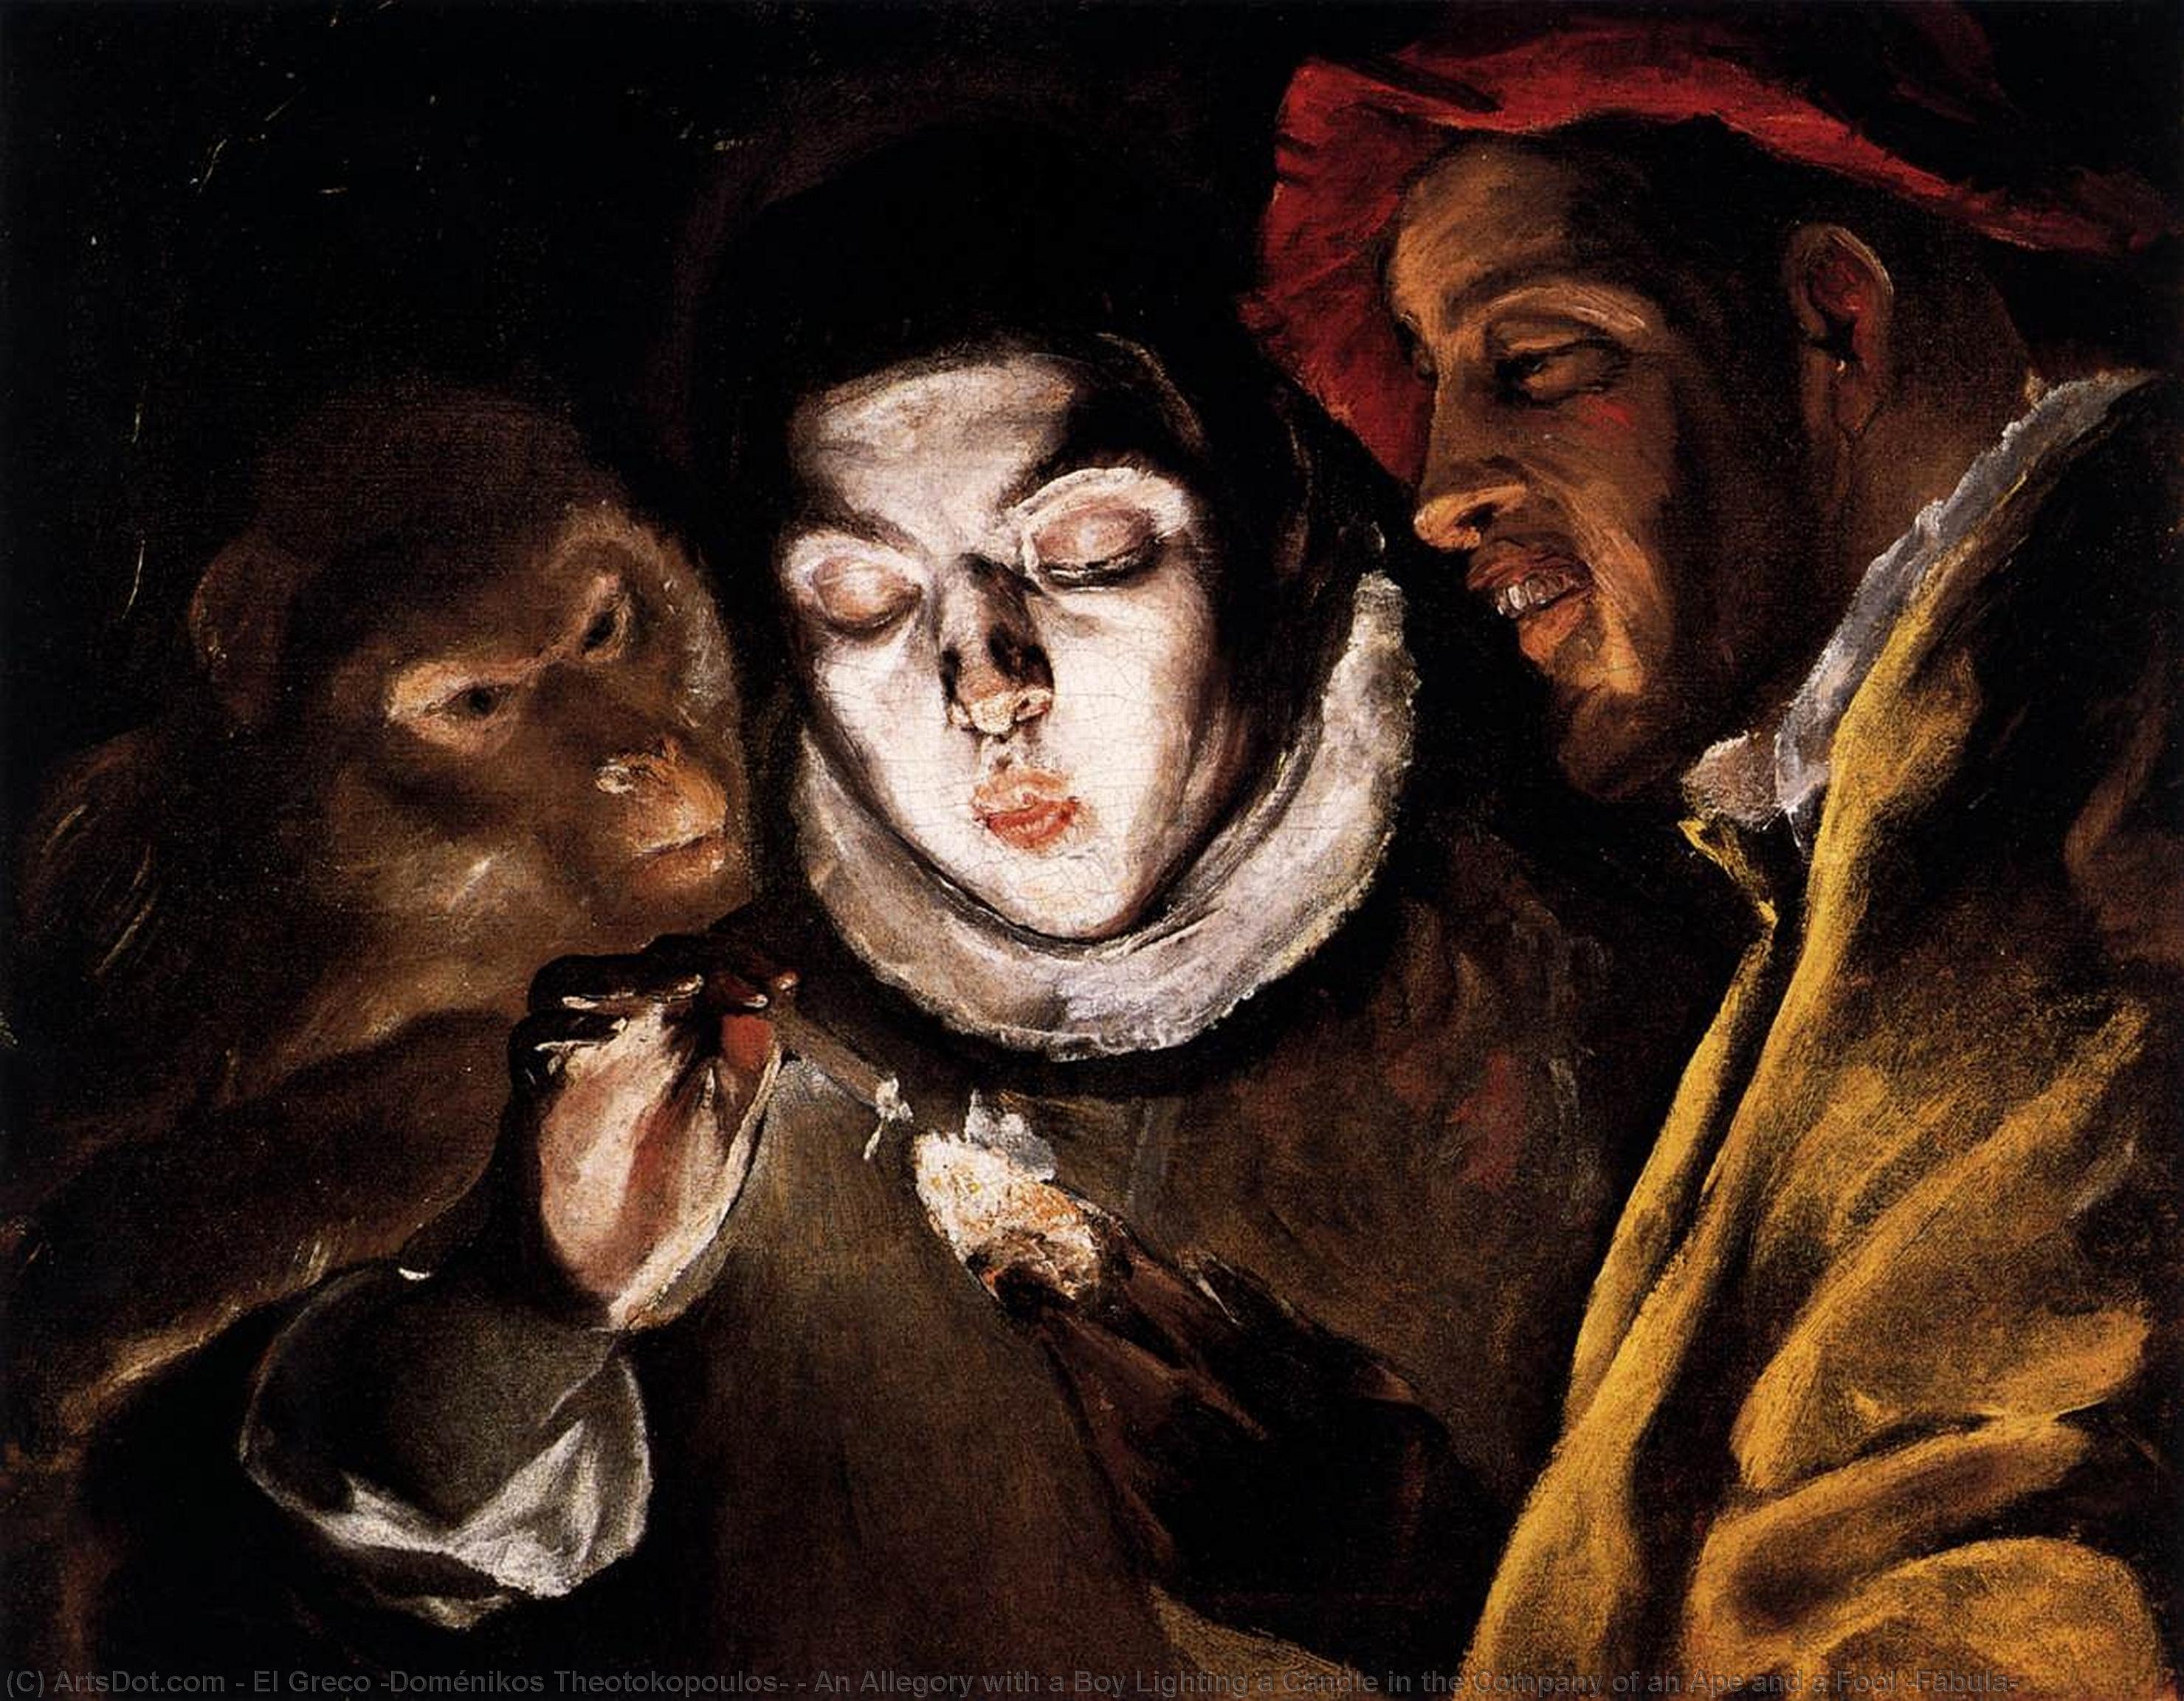 WikiOO.org - Encyclopedia of Fine Arts - Maleri, Artwork El Greco (Doménikos Theotokopoulos) - An Allegory with a Boy Lighting a Candle in the Company of an Ape and a Fool (Fábula)